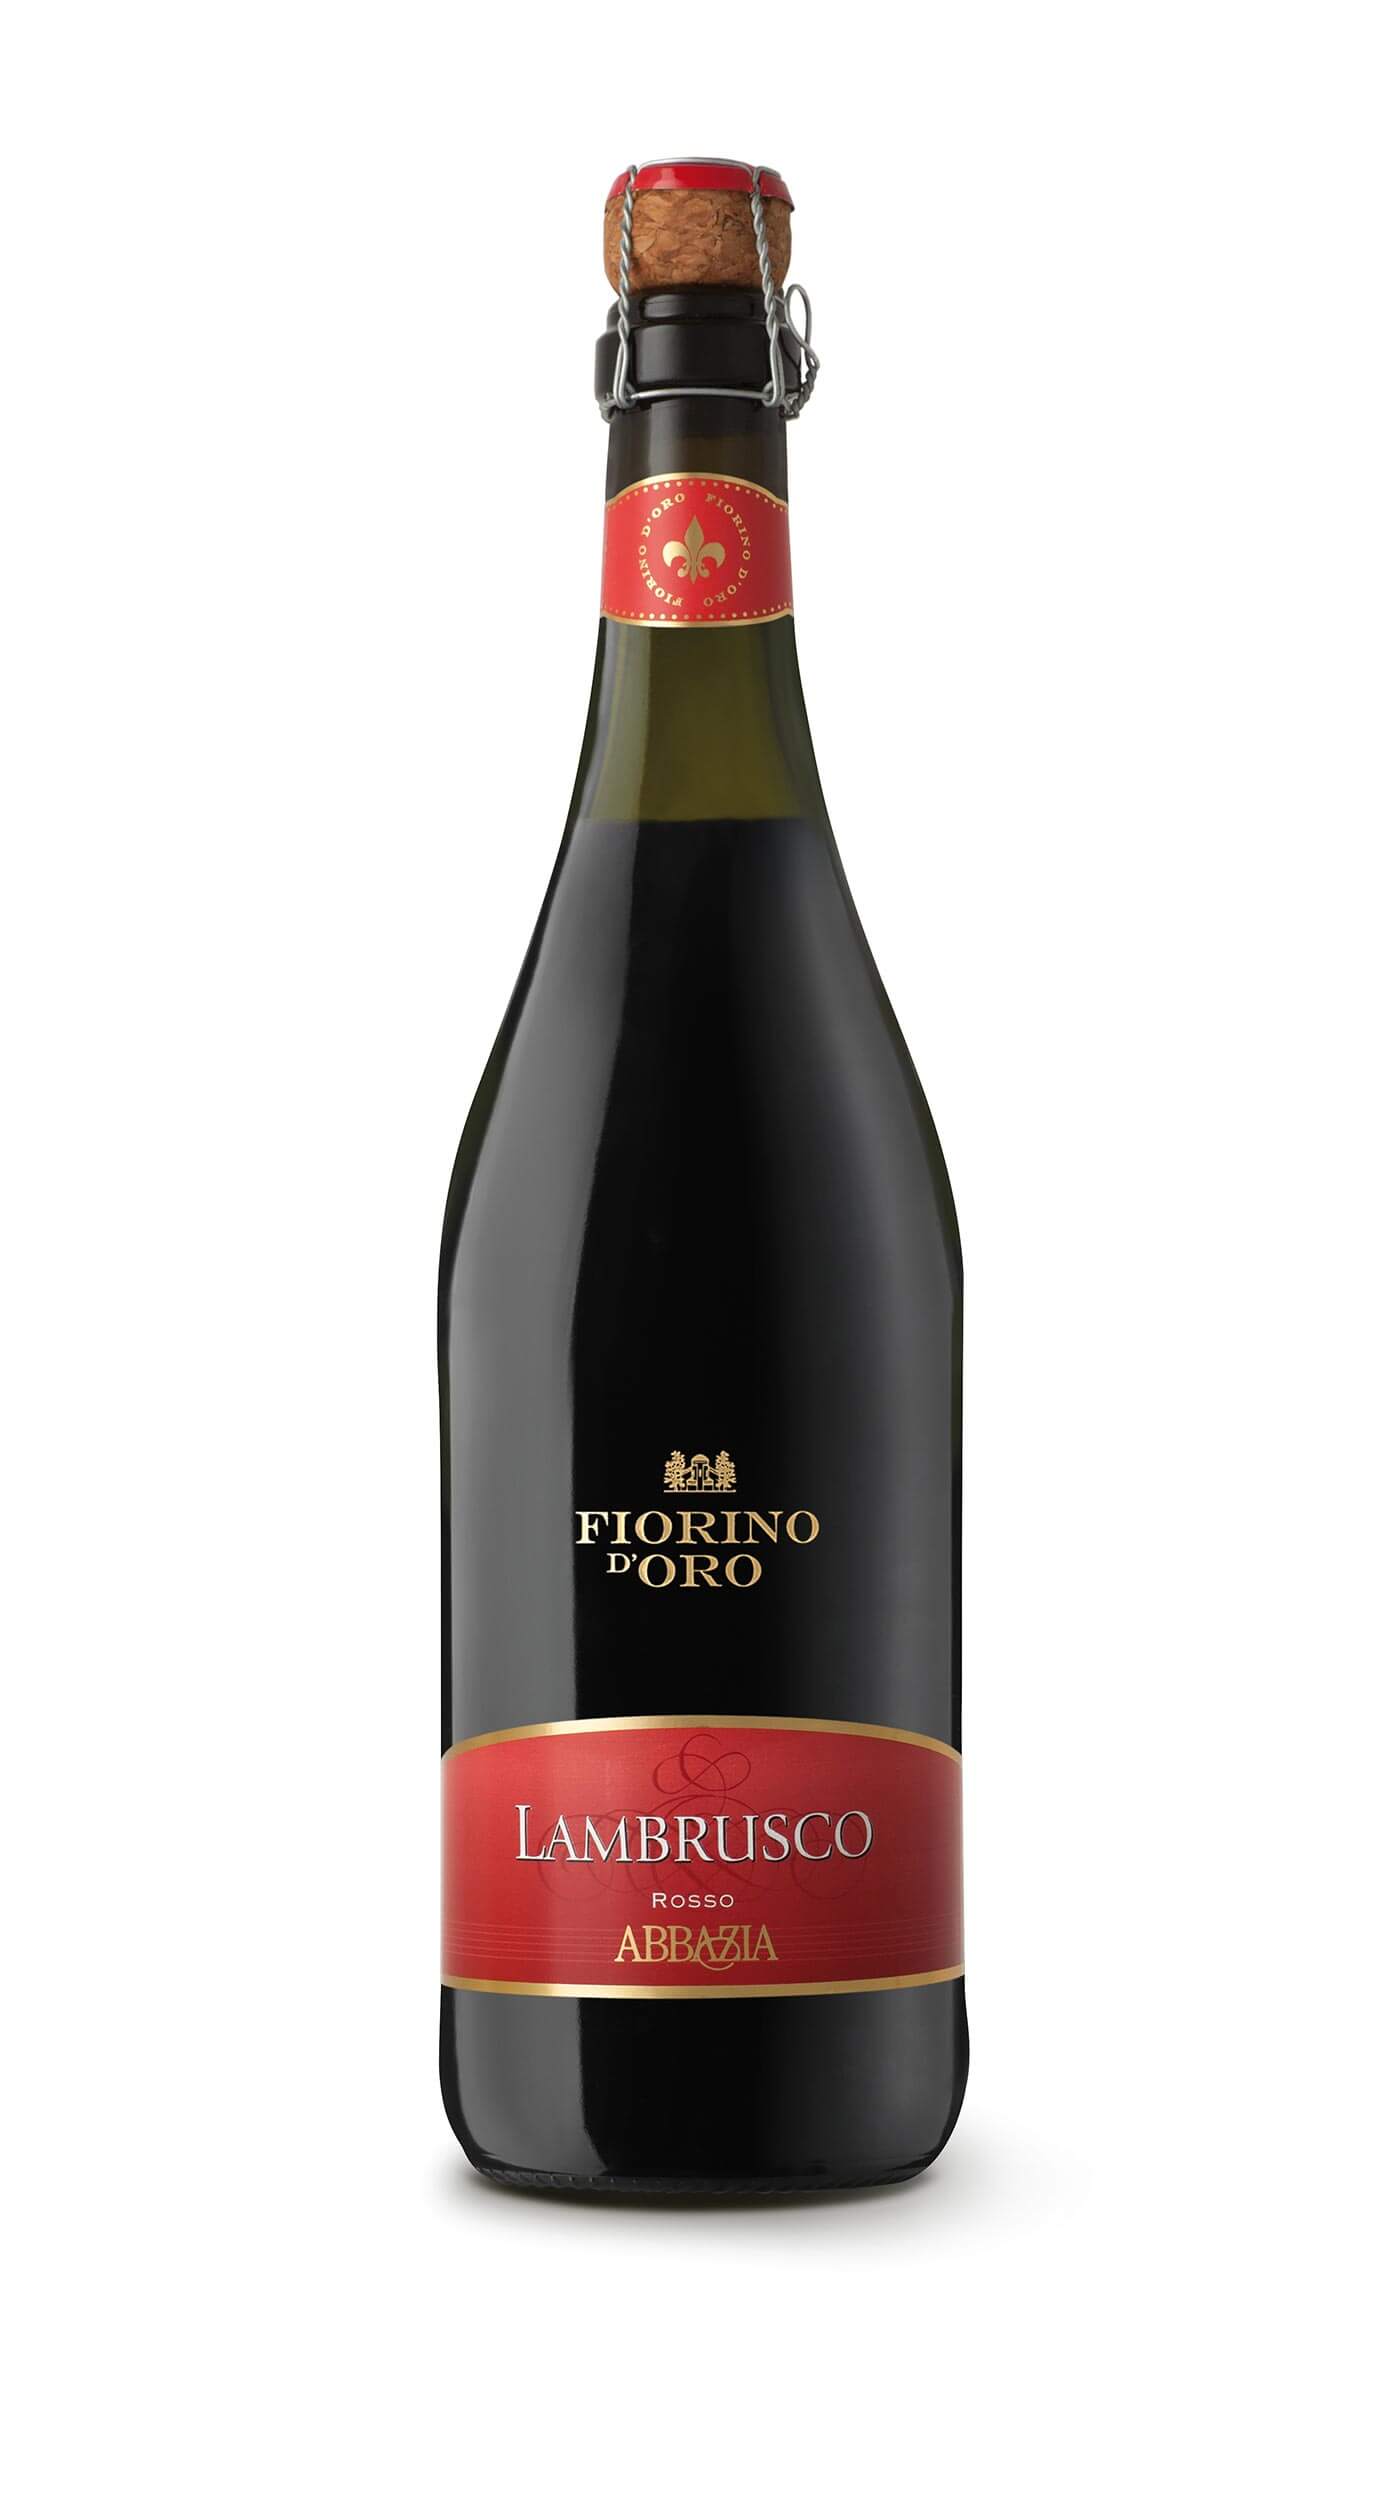 Lambrusco dolce цена. Вино Ламбруско Dolce Rosso.